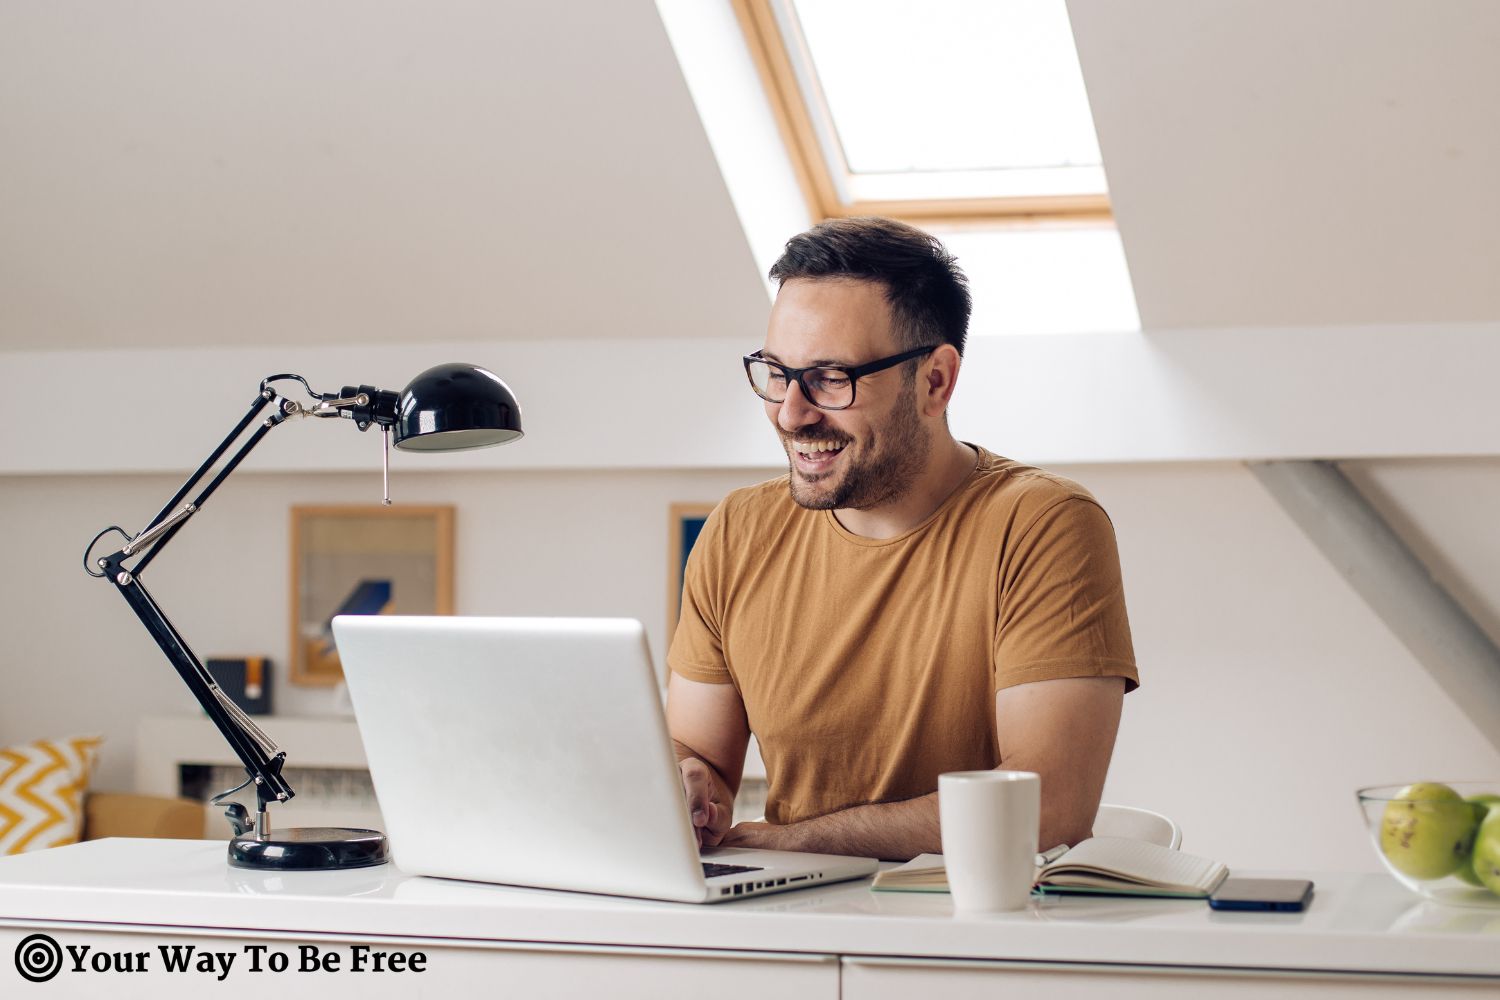 Happy man working from his home office. Mental health benefits of working from home